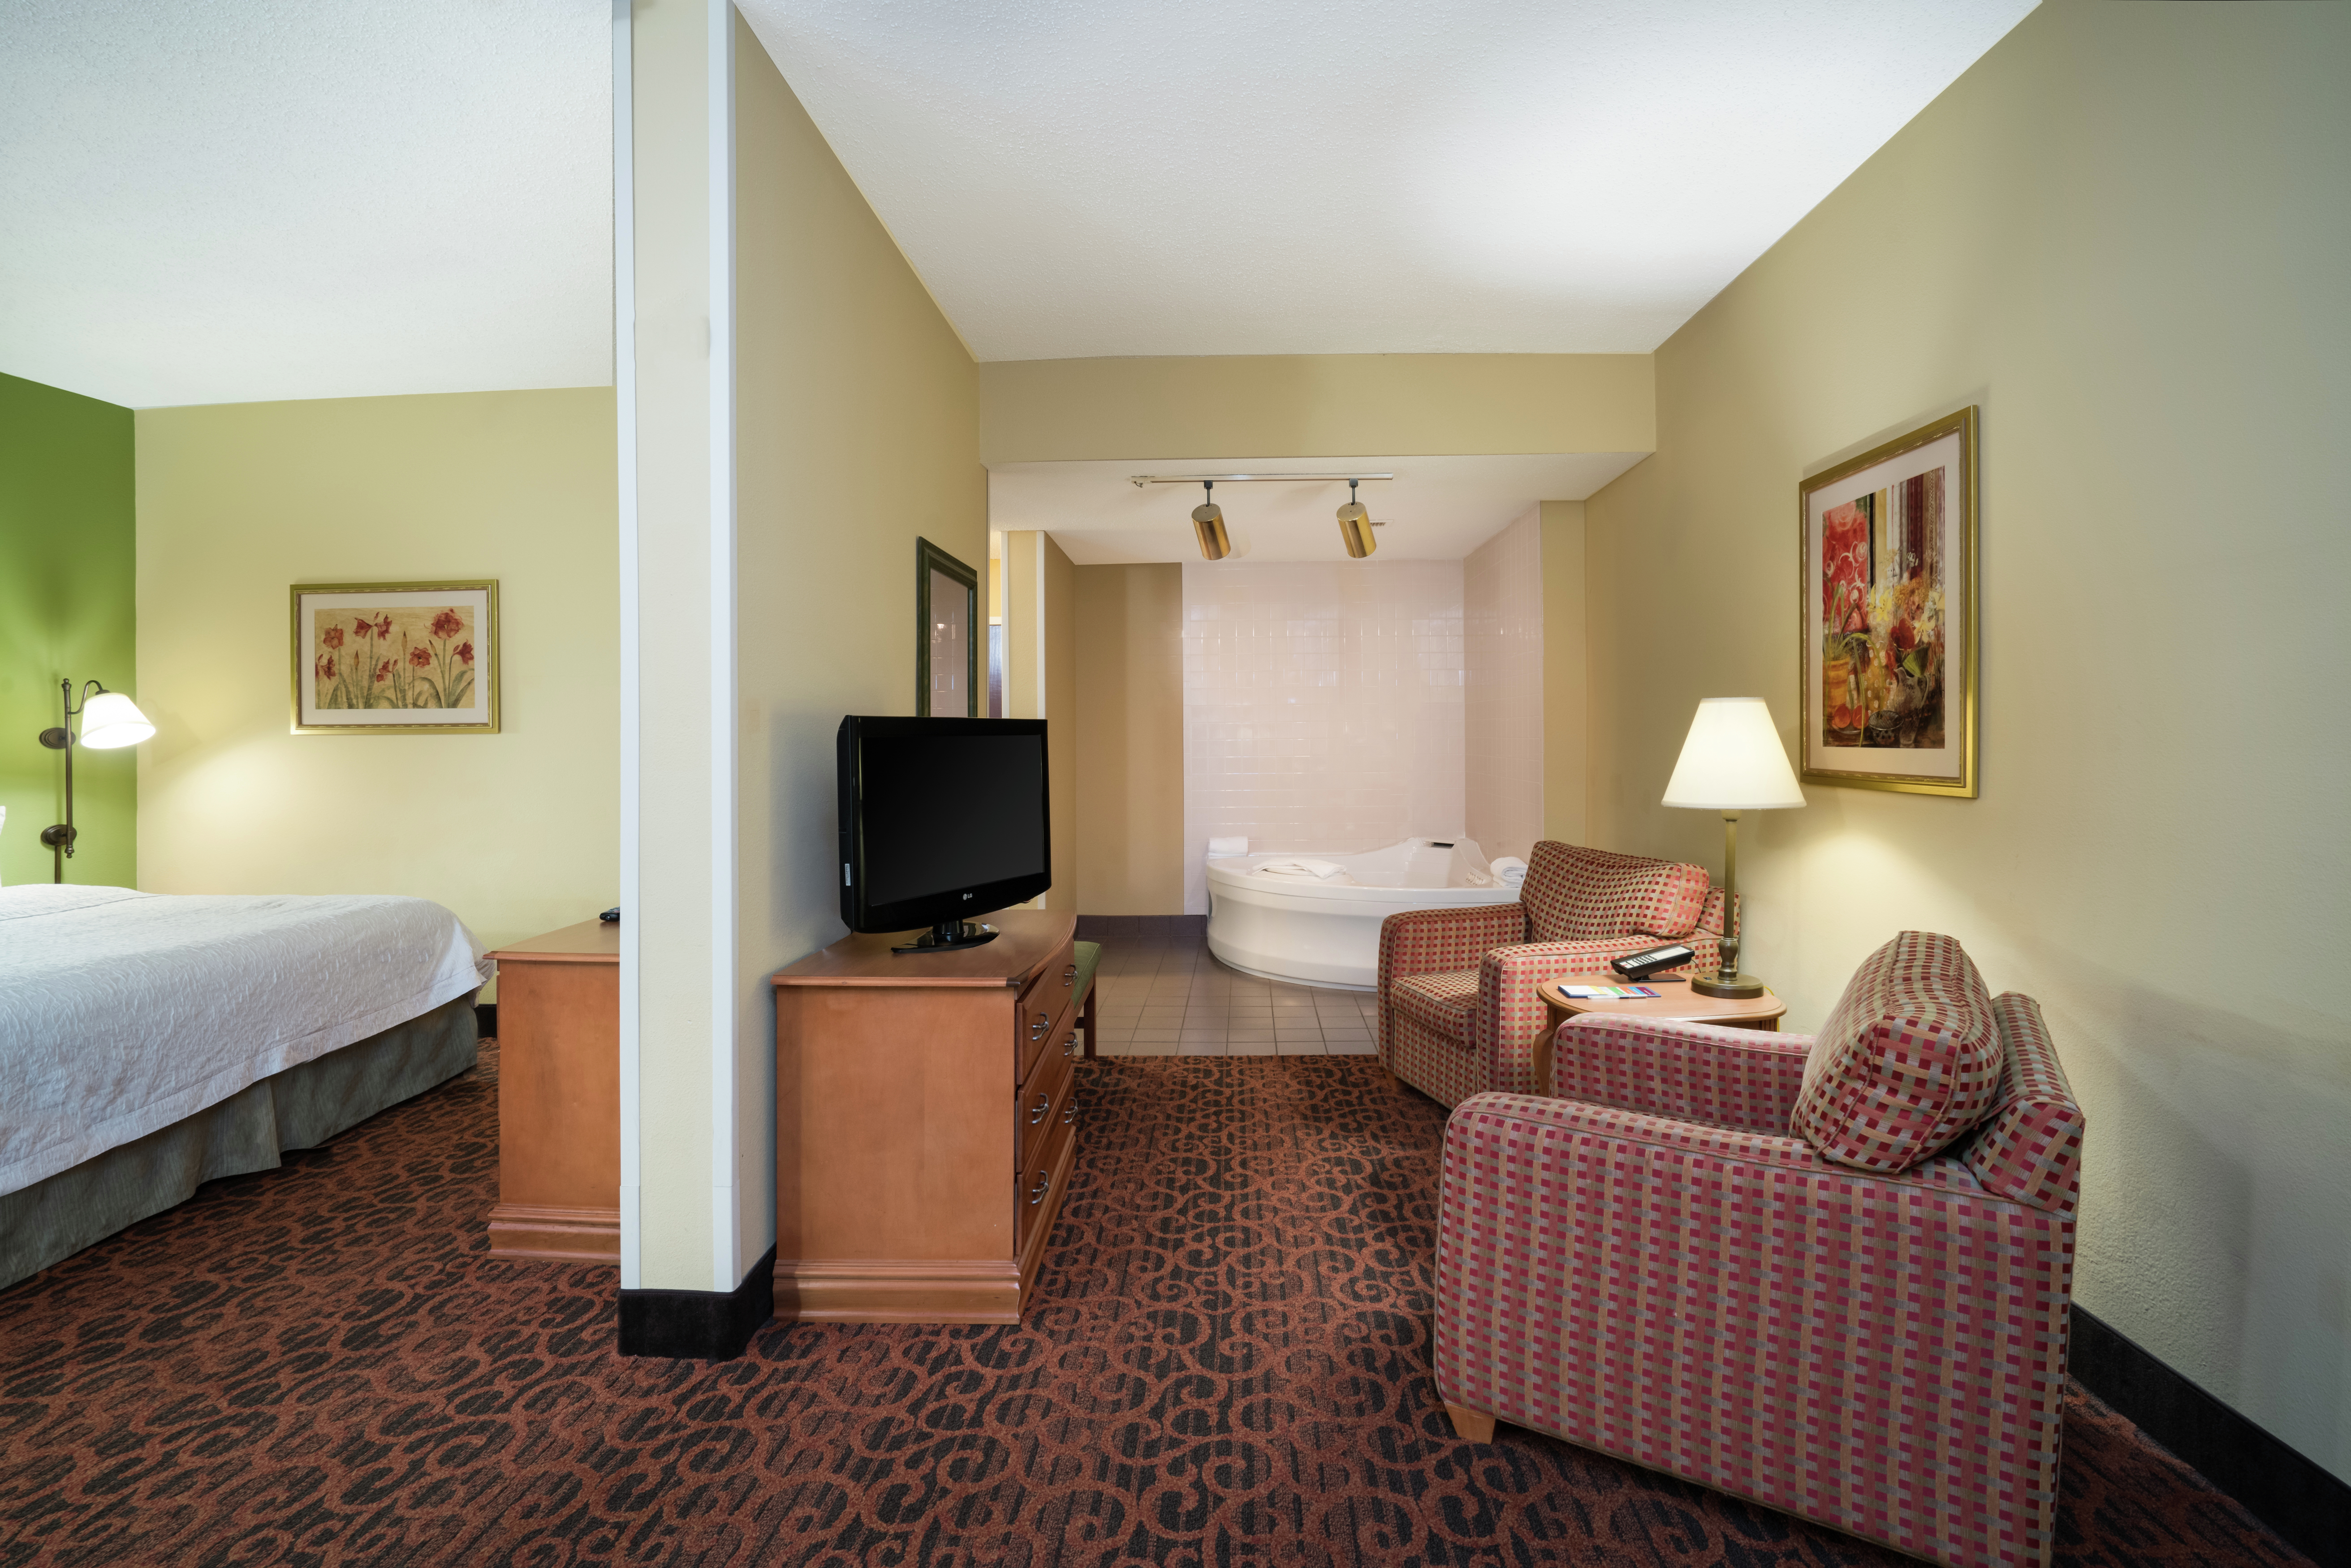 Suite with Lounge Area, TV, King Bed, and Jacuzzi